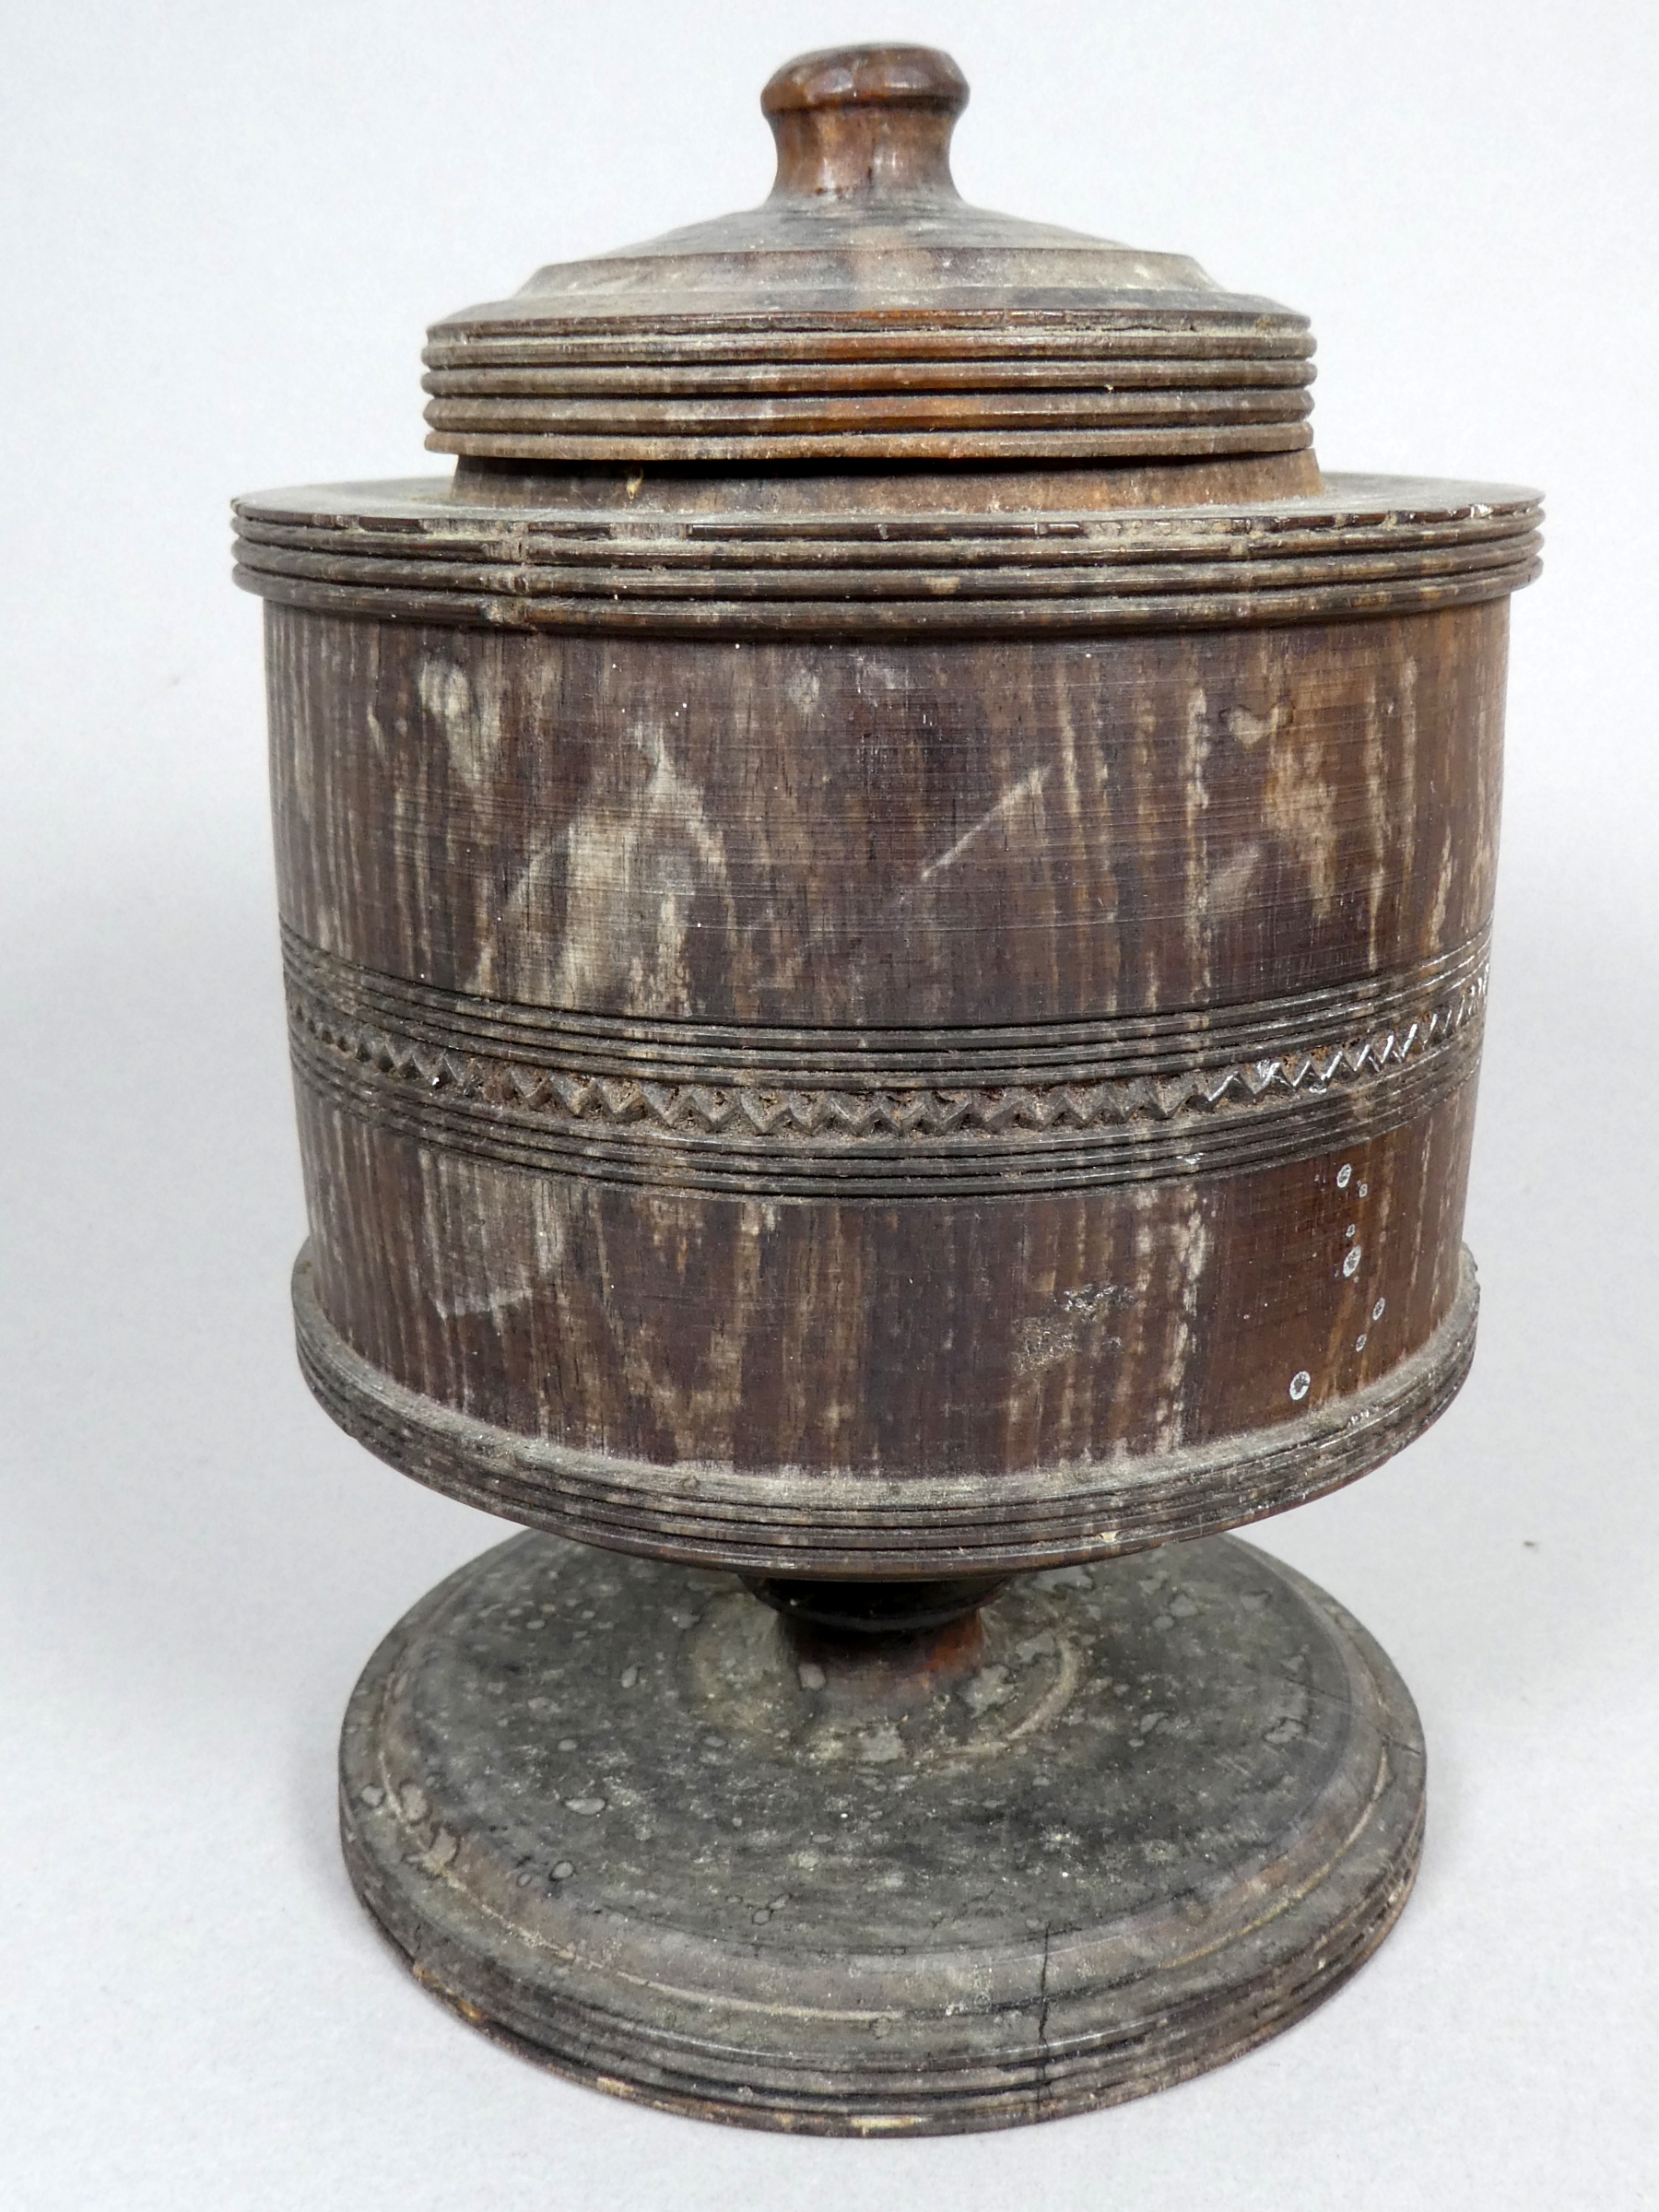 A 19th century bronze measure - engraved with palmettes, height 7cm, together with two treen jars - Image 5 of 6